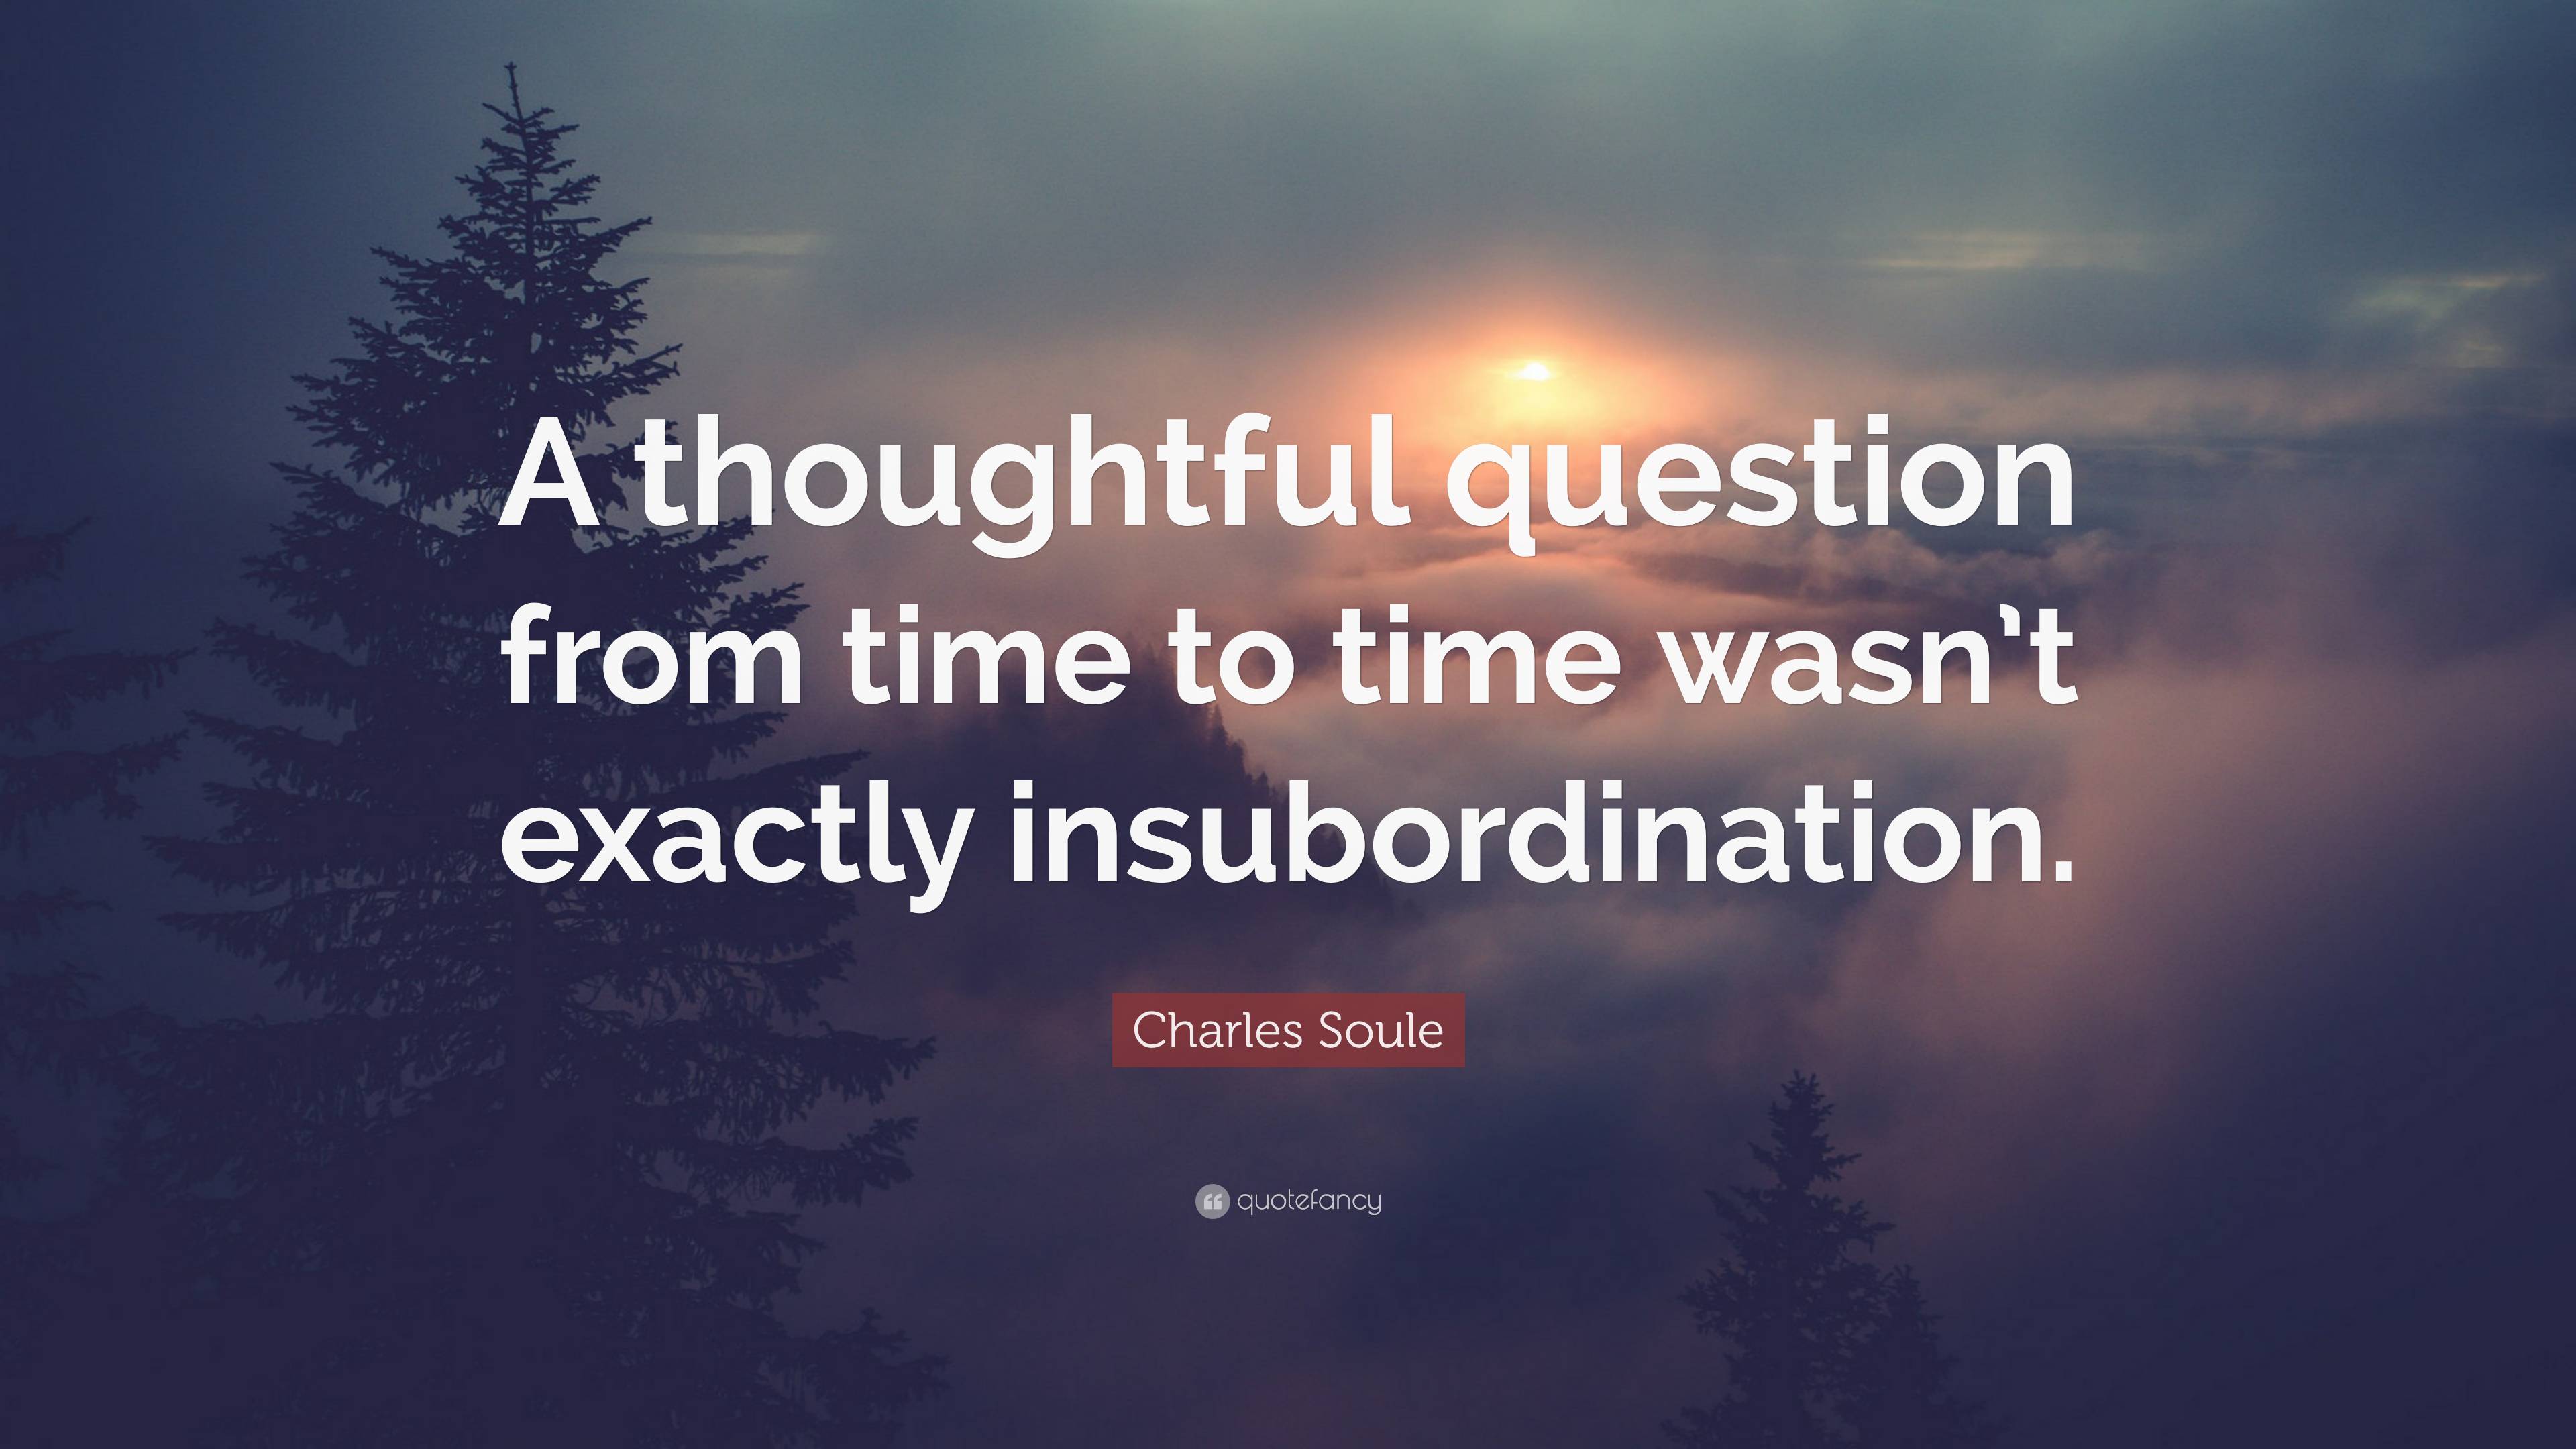 Charles Soule Quote: “A thoughtful question from time to time wasn